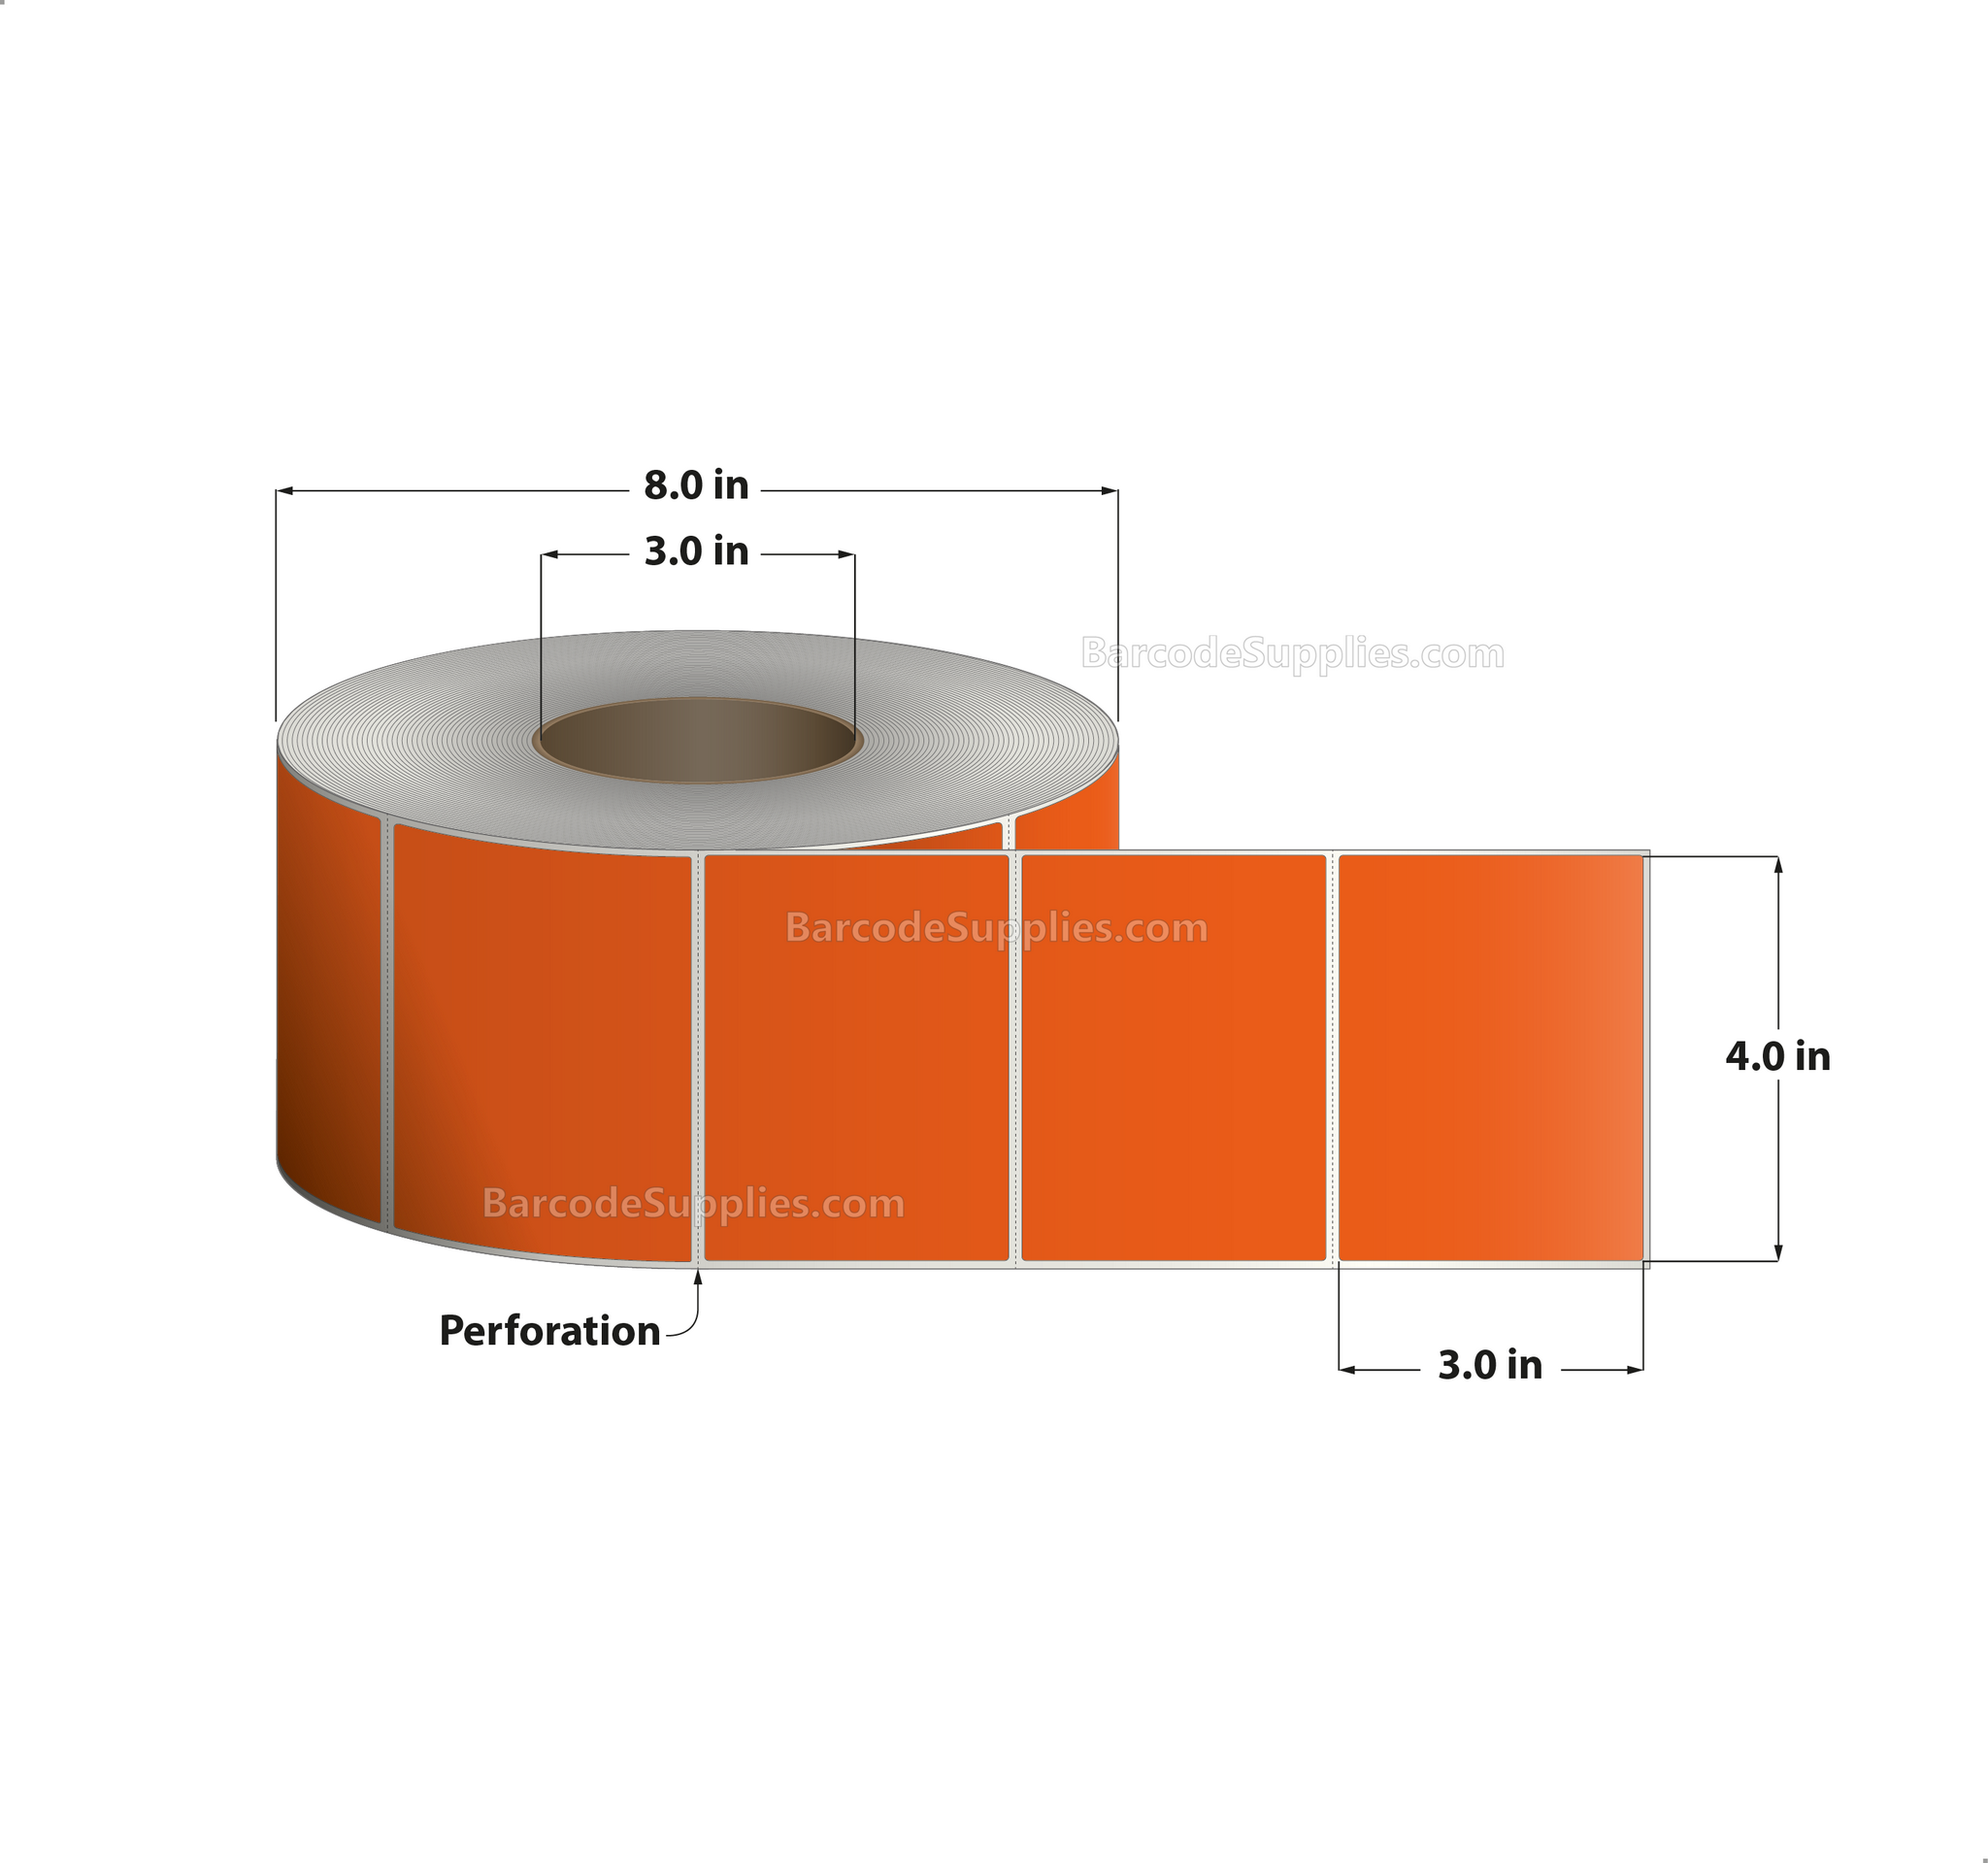 4 x 3 Thermal Transfer Fluorescent Orange Labels With Permanent Acrylic Adhesive - Perforated - 1900 Labels Per Roll - Carton Of 4 Rolls - 7600 Labels Total - MPN: TH43-1PFO